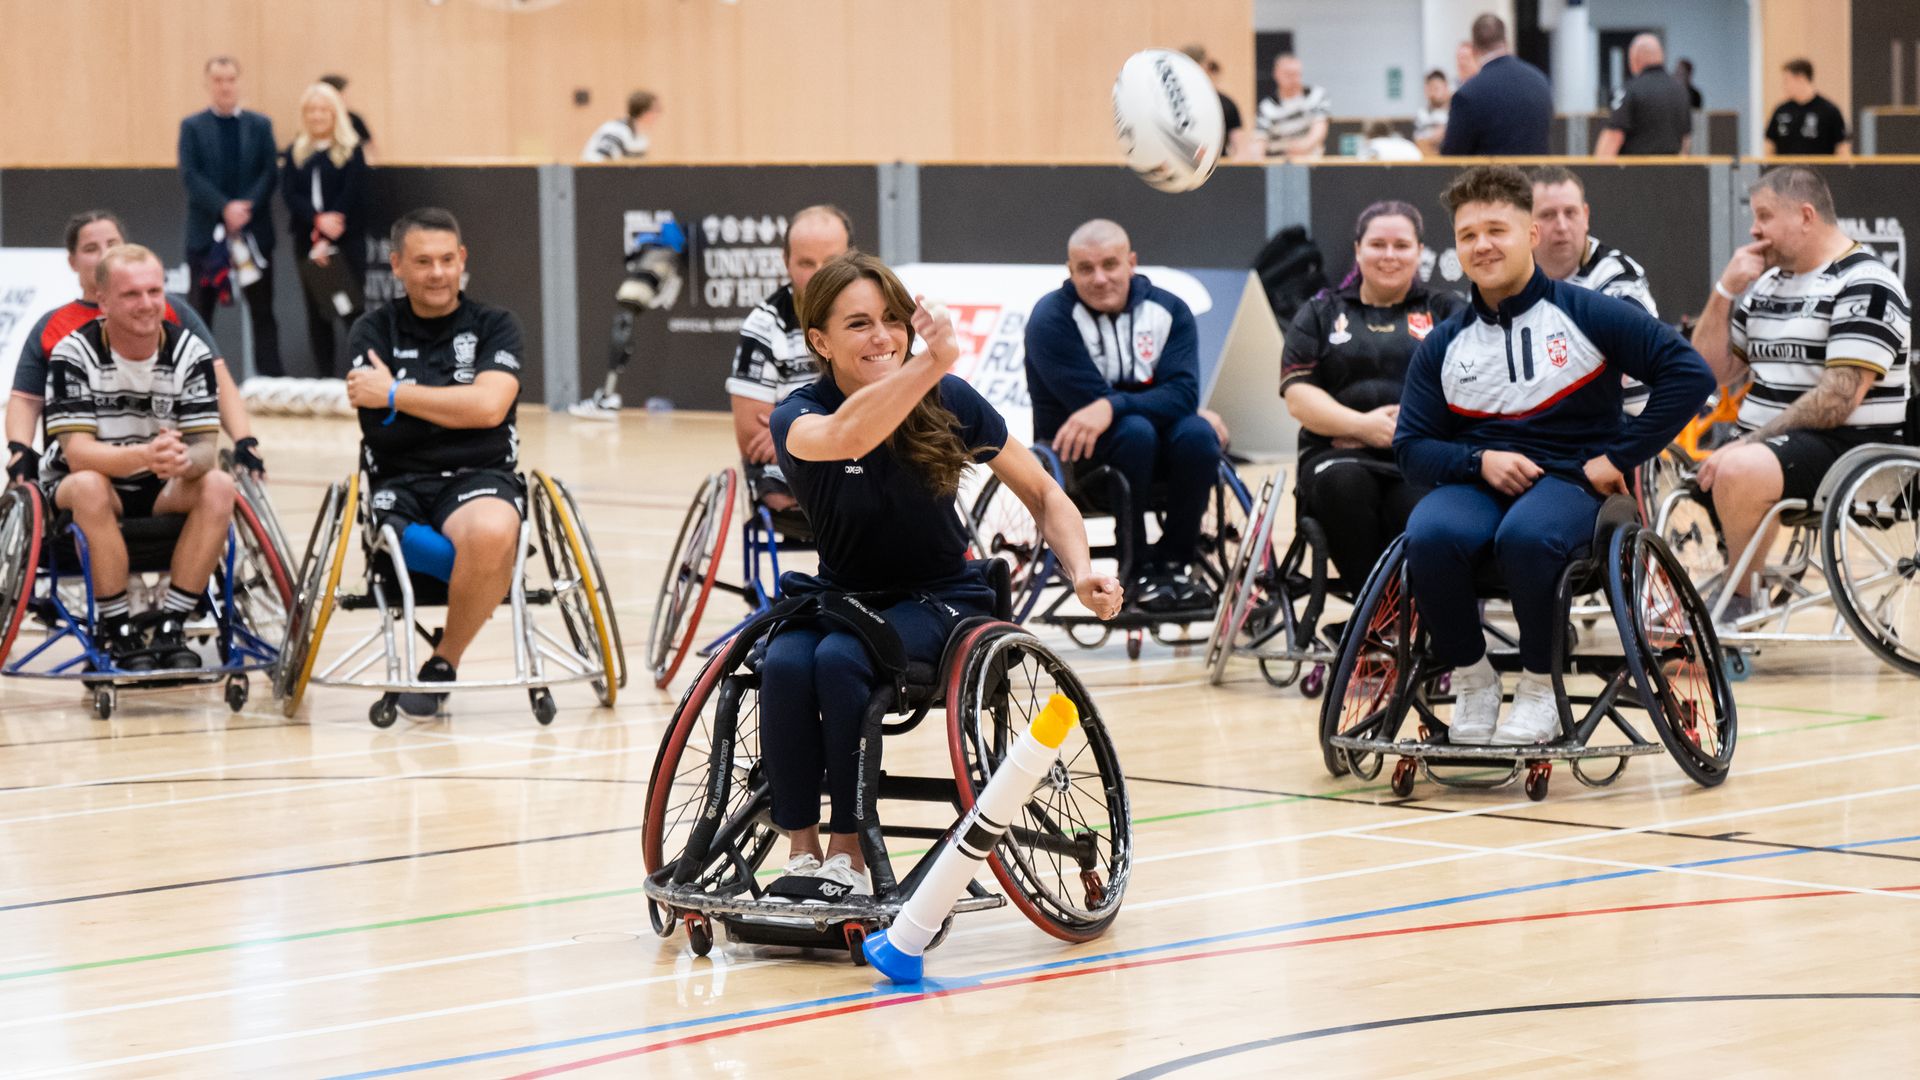 Kate Middleton scores a conversion during wheelchair rugby